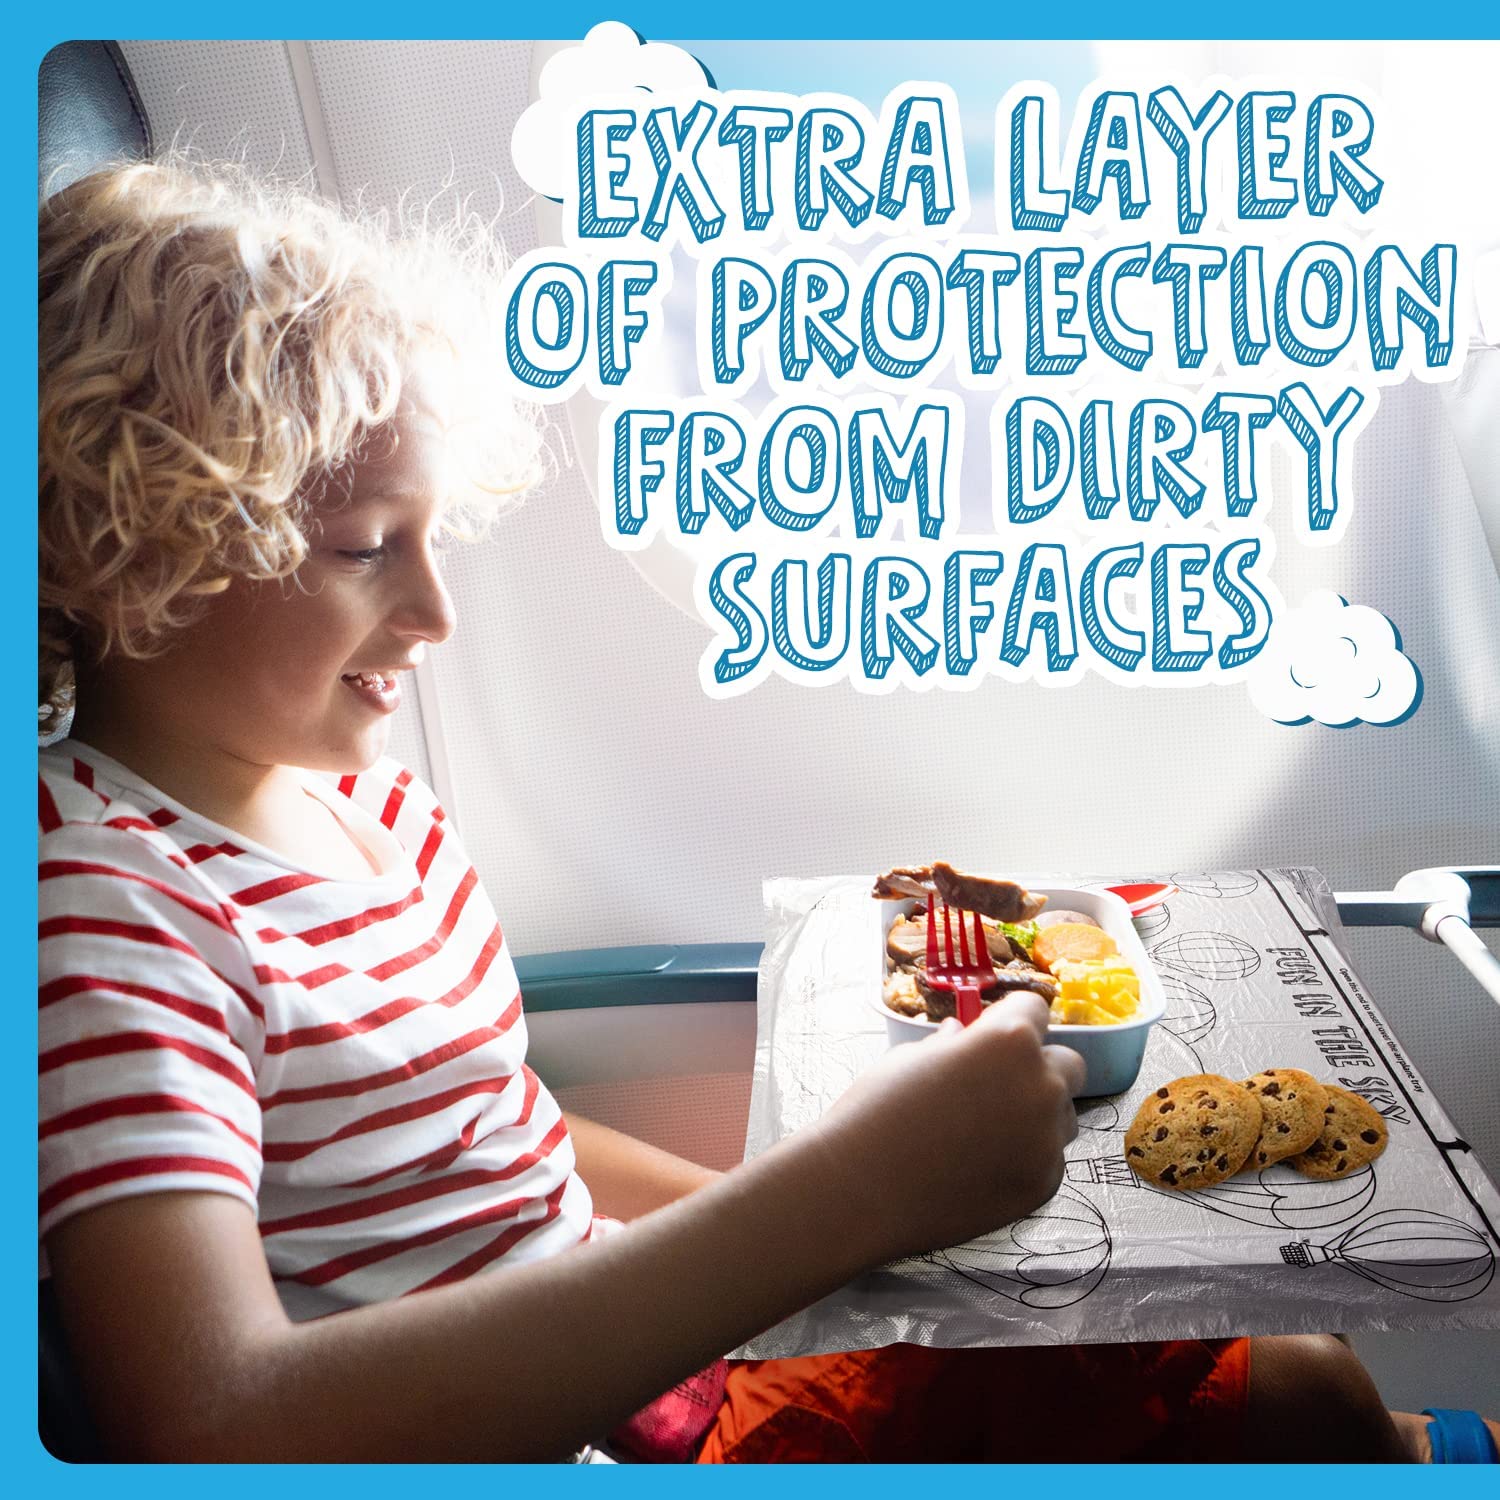 TrayMask Disposable Tray Table Cover | Must Have Airplane Travel Essentials  | Perfect for Toddlers, Kids and Adults Travel Accessories | Provides a